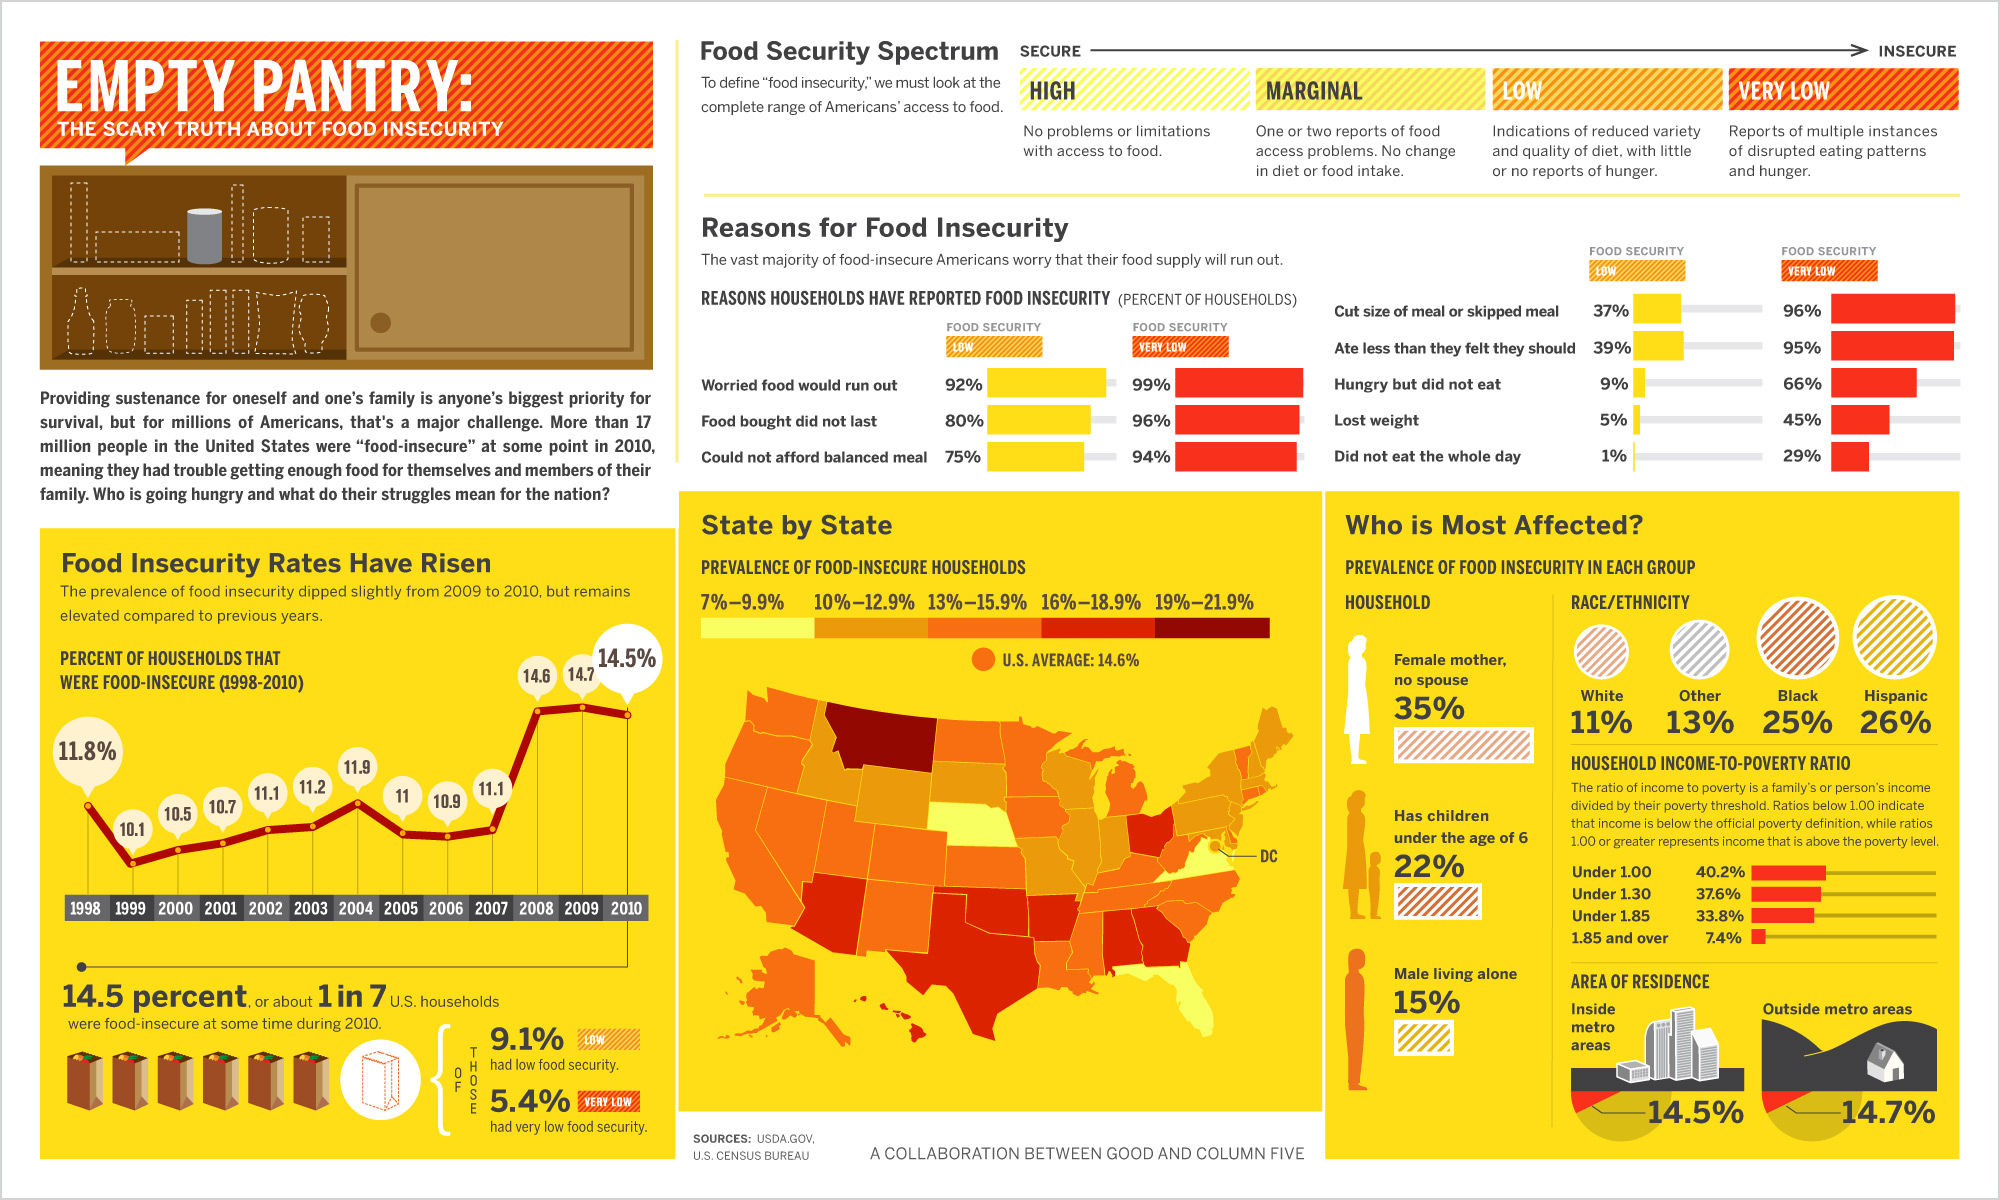 Check out this great infographic on Food Security from GOOD Magazine: